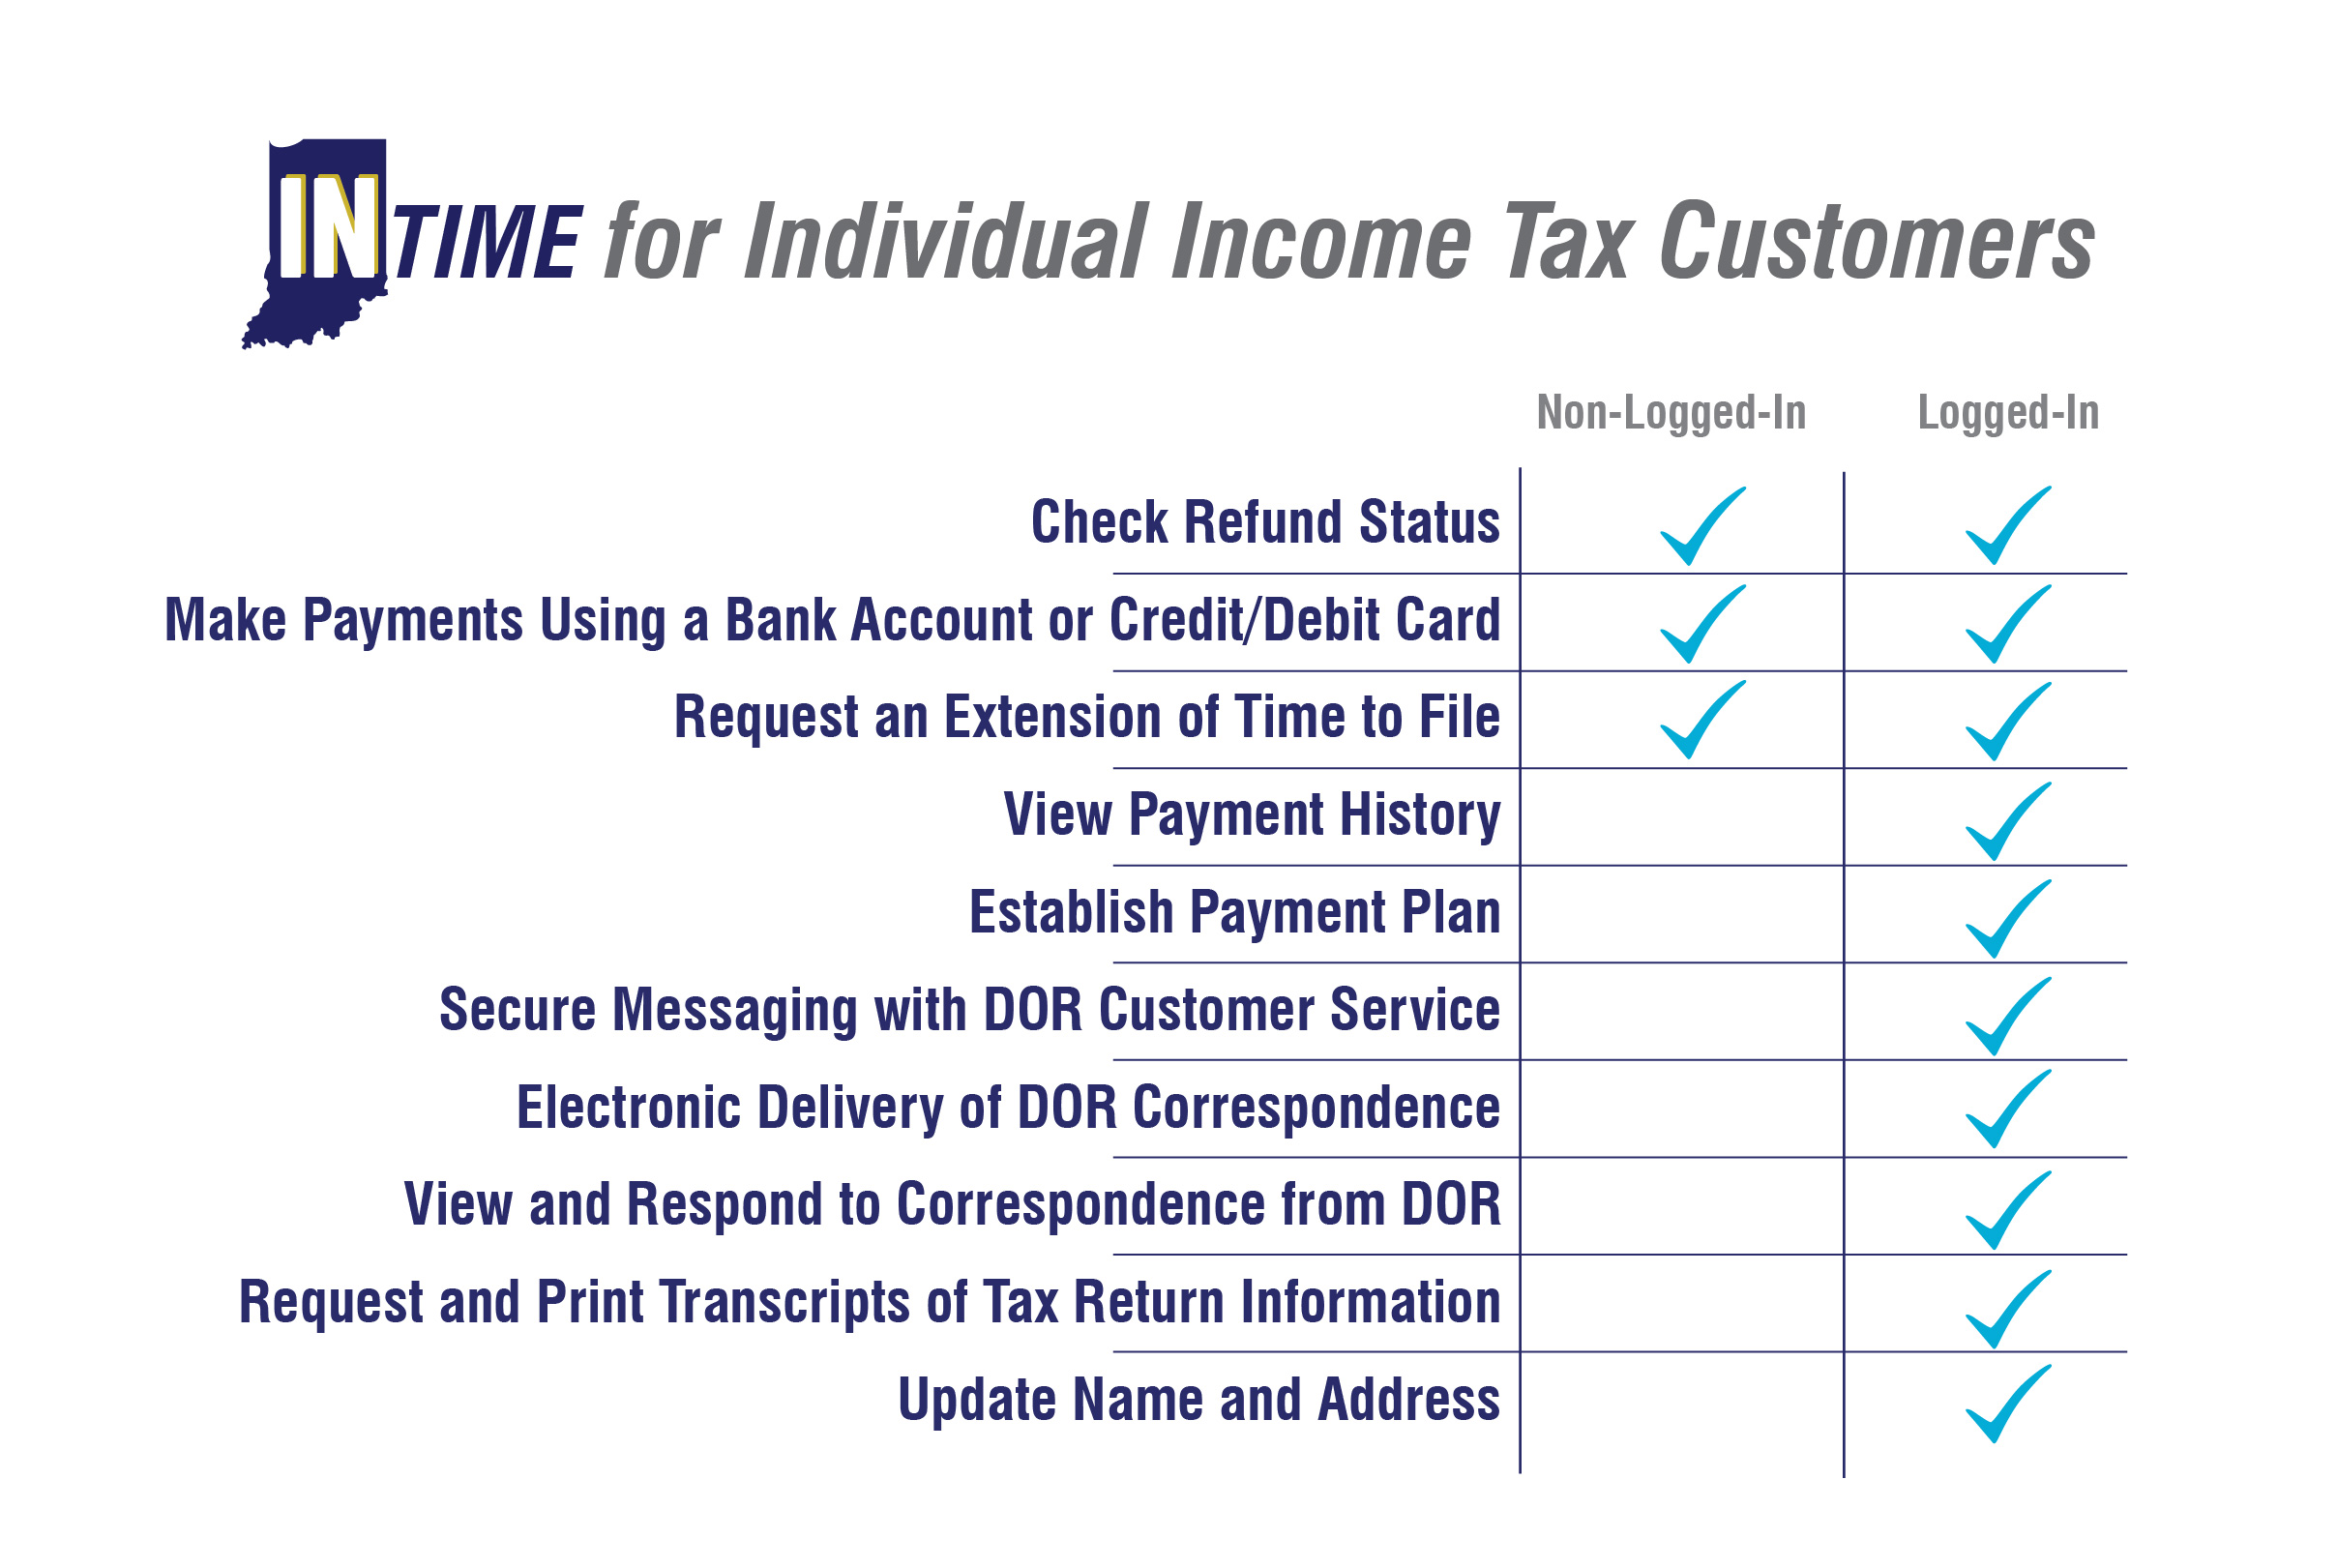 INTIME Functions for Individual Tax Customers